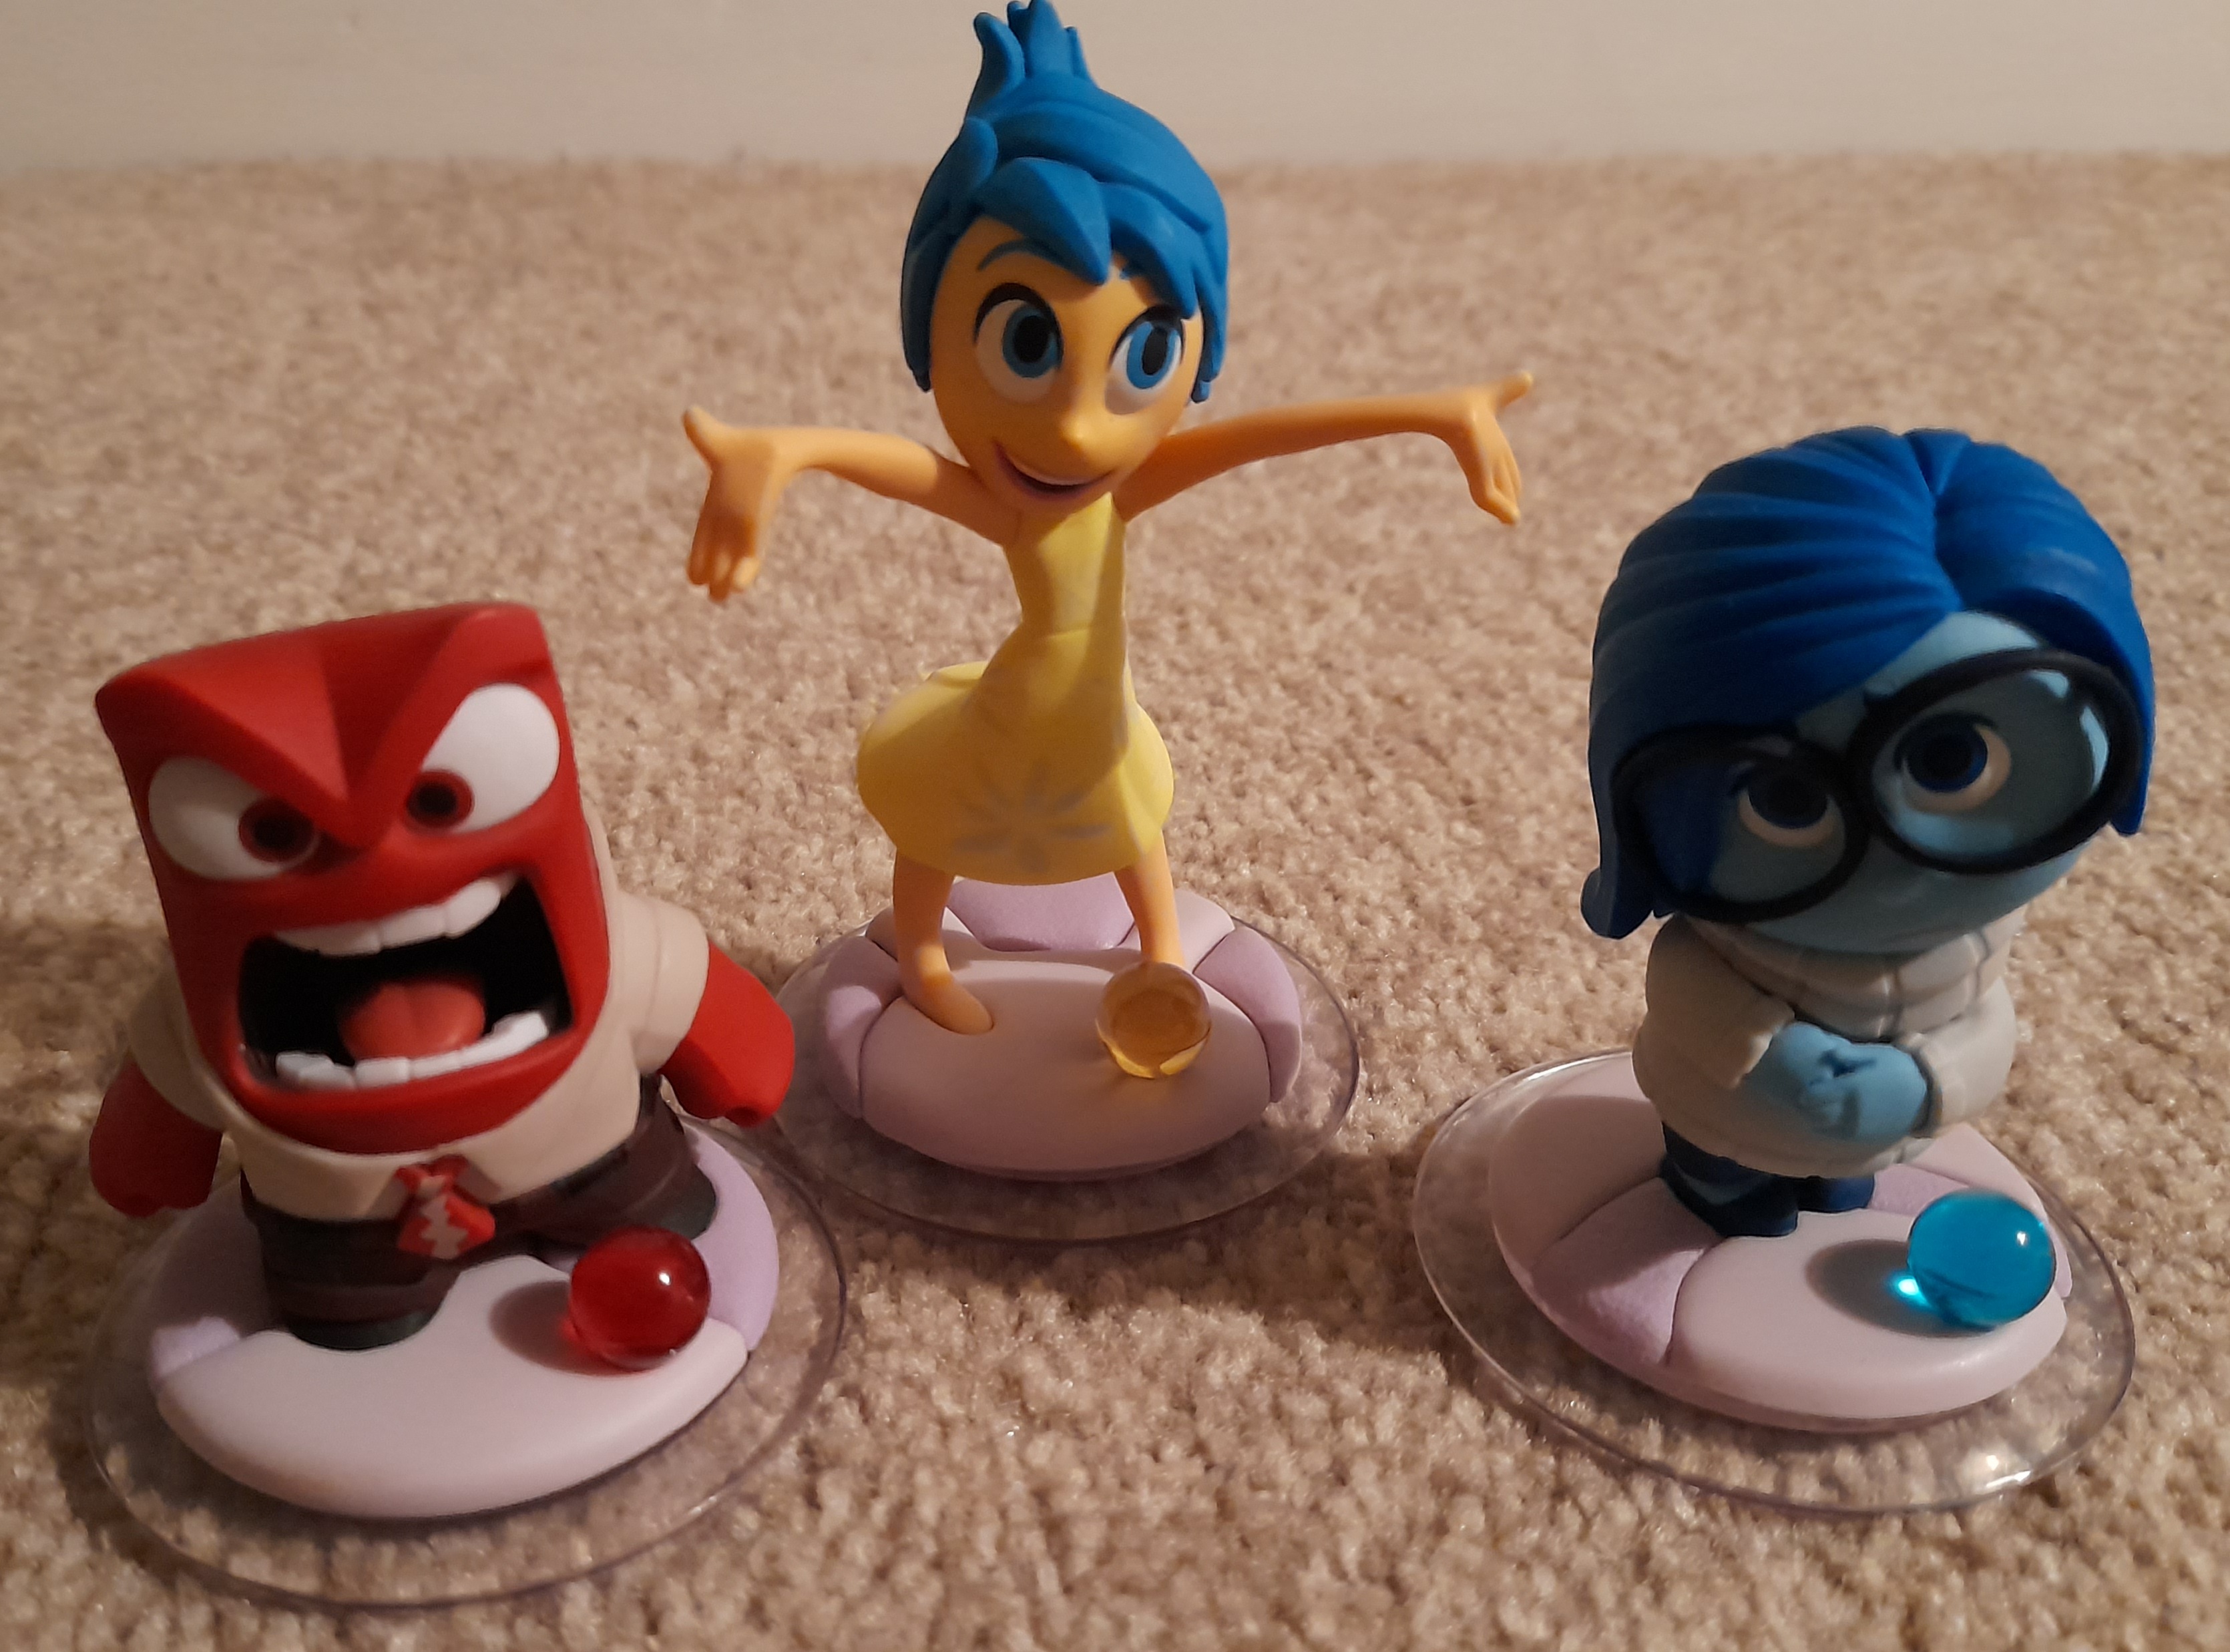 Three characters red is Anger, yellow is Joy and blue is Sadness